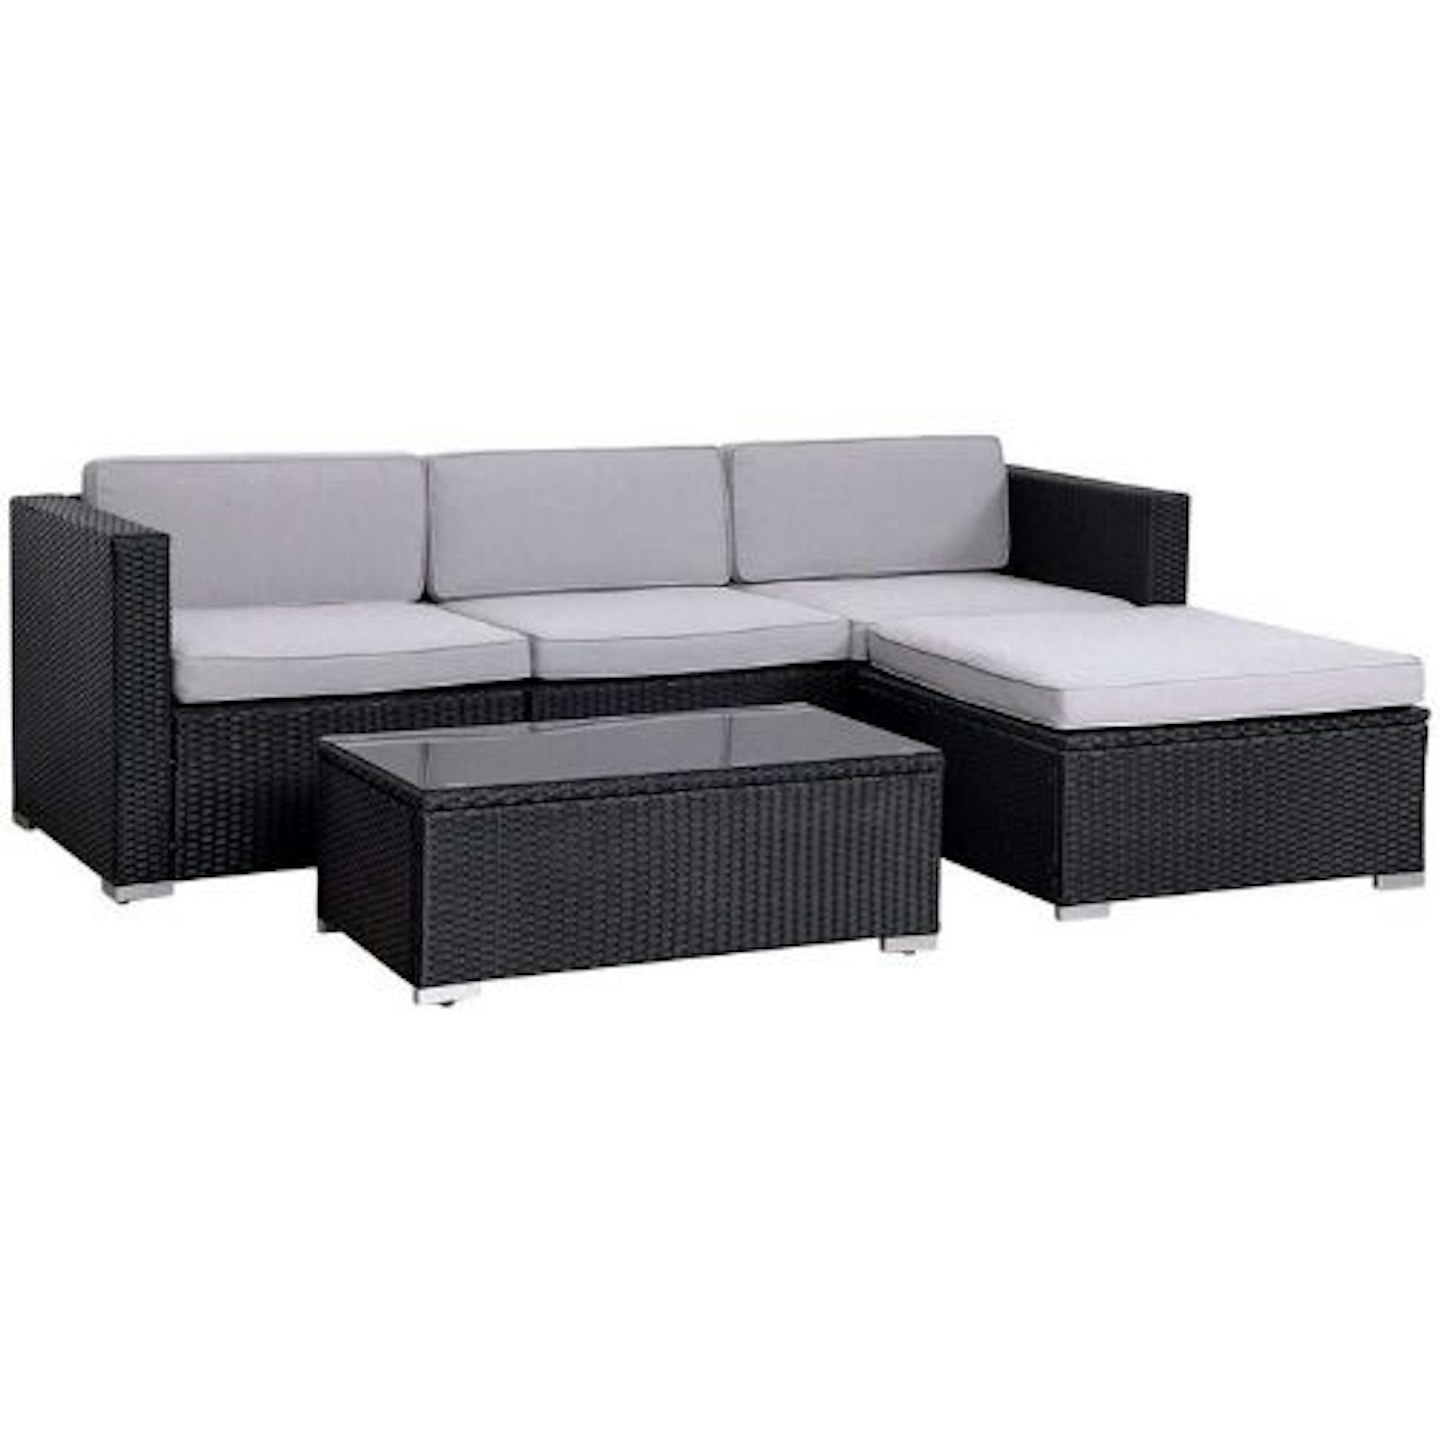 EVRE Rattan Outdoor 4 Seater California Sofa Set with Coffee Table